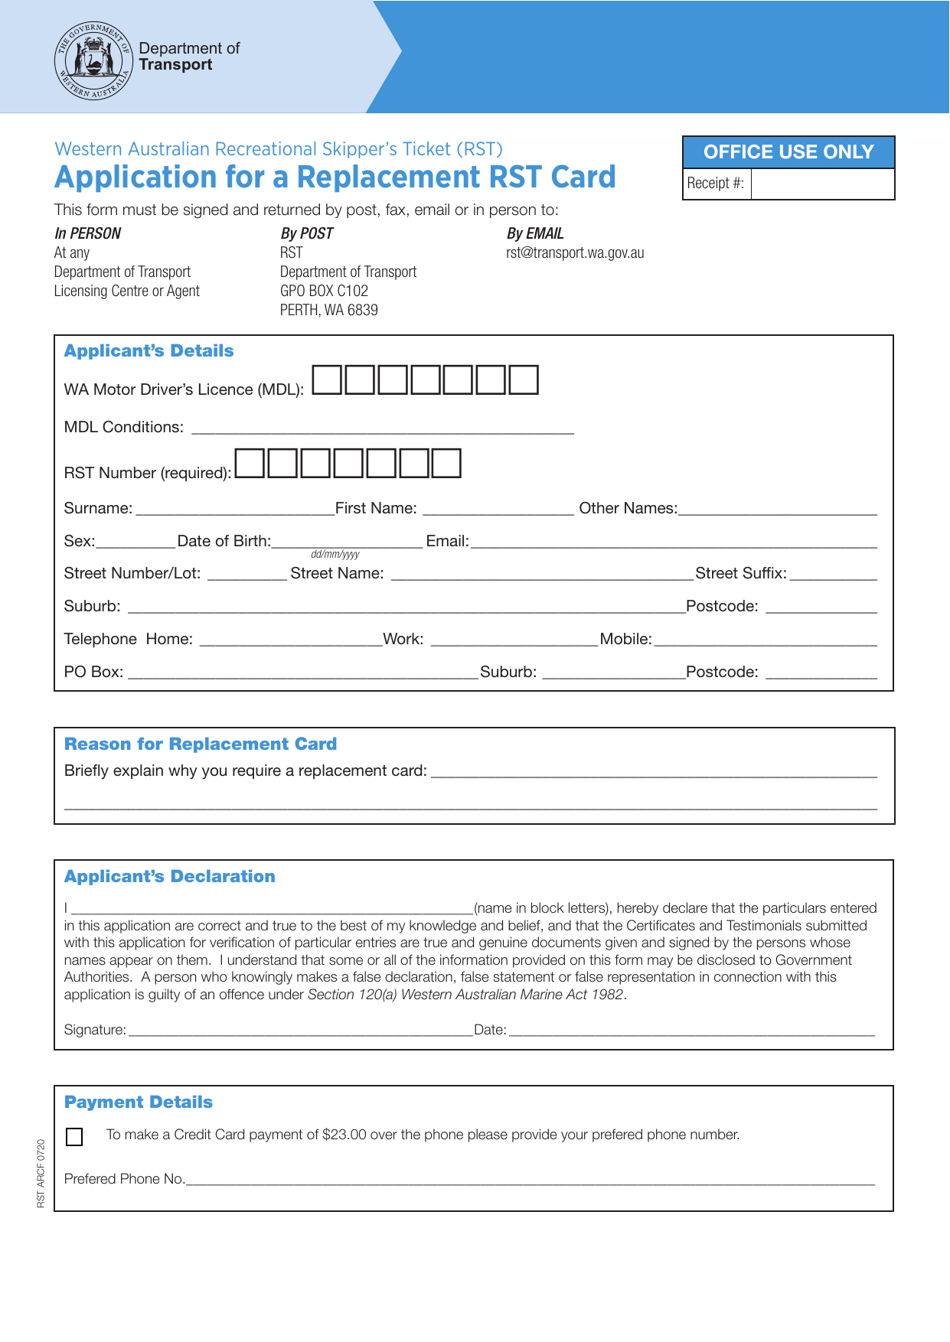 Western Australian Recreational Skippers Ticket (Rst) Application for a Replacement Rst Card - Western Australia, Australia, Page 1